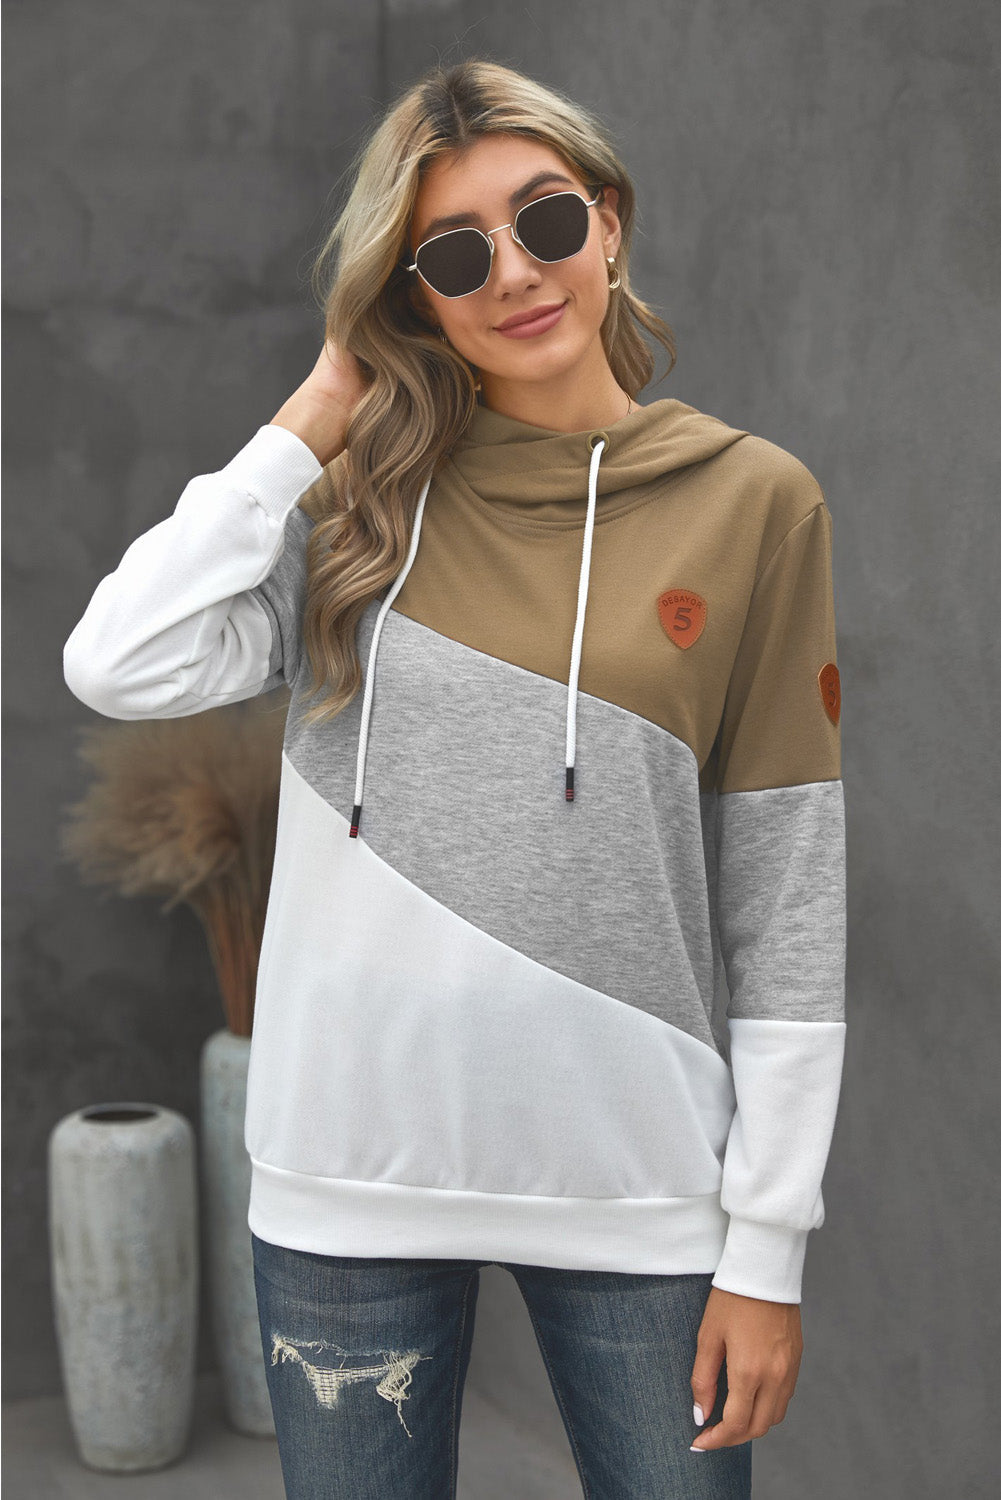 Color Block Cowl Neck Hoodie - Women’s Clothing & Accessories - Shirts & Tops - 23 - 2024